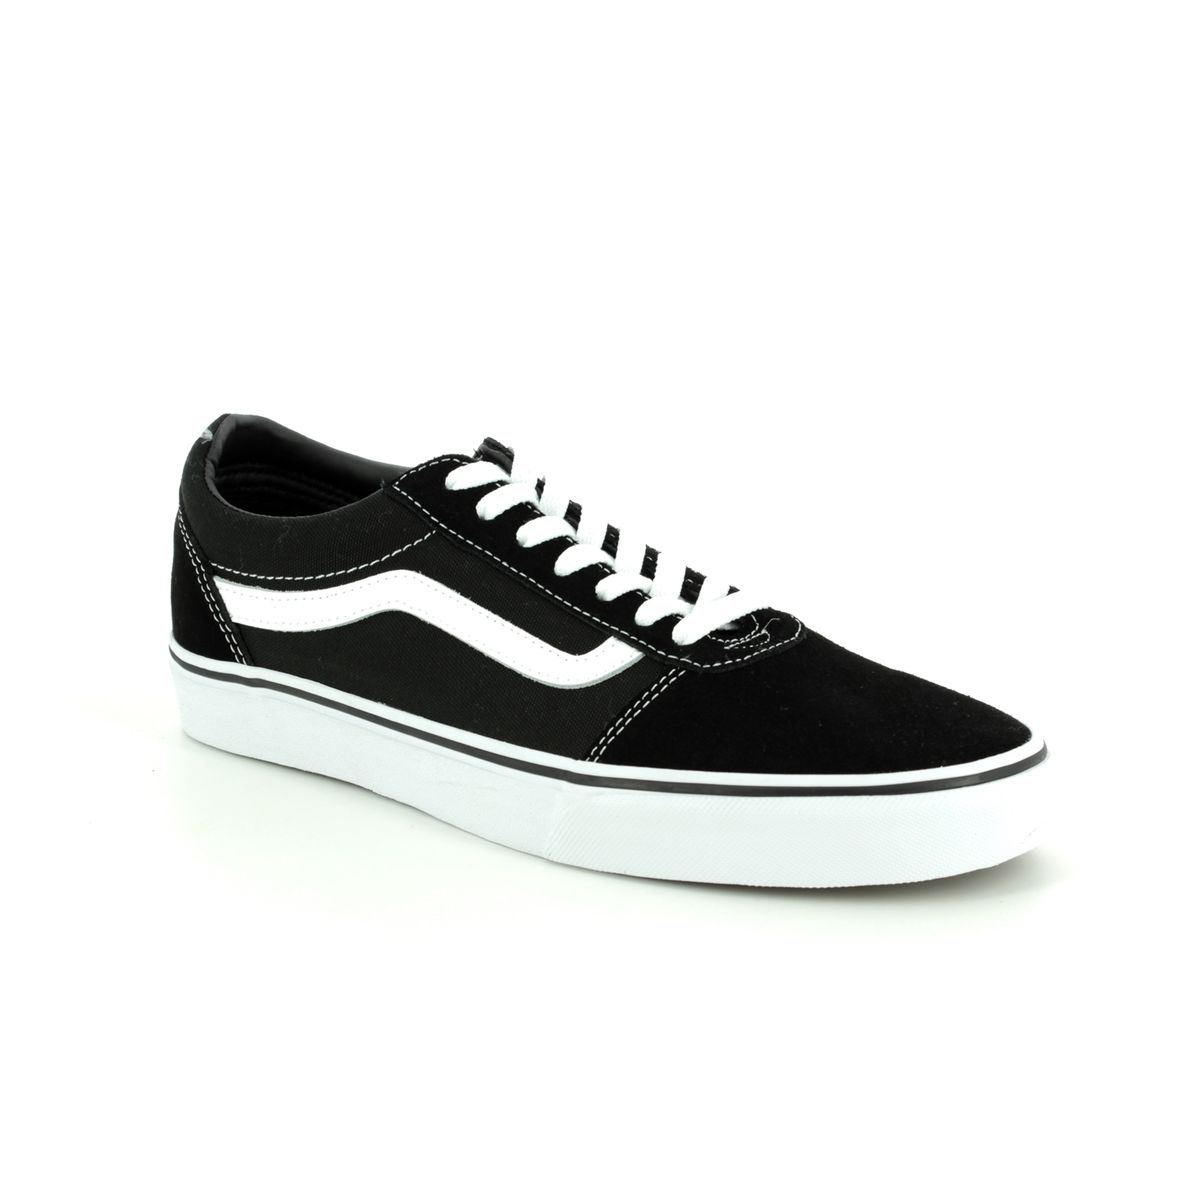 Vans Ward Black Mens trainers VN0A36EMC-4R in a Plain Leather and Man-made in Size 11